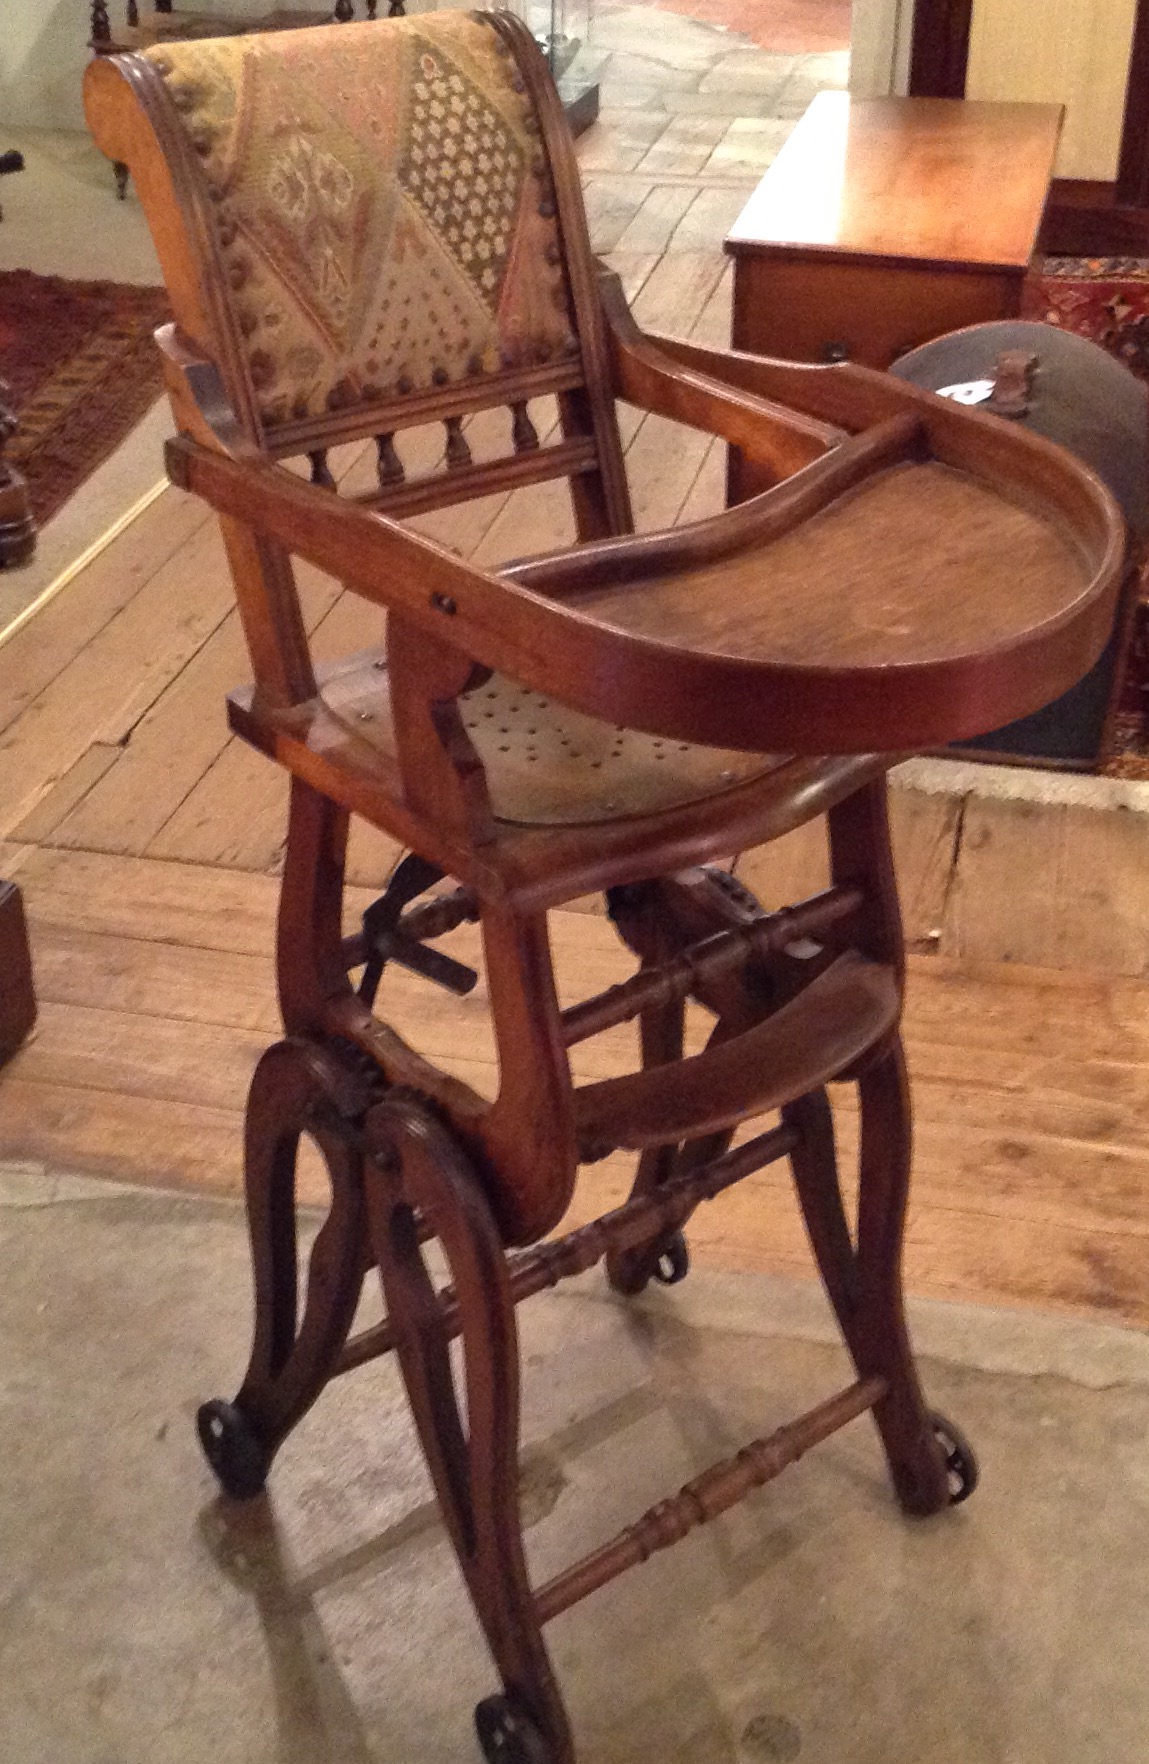 AN EDWARDIAN METAMORPHIC CHILD'S HIGH CHAIR Having beech wood on wheels and a decorative fabric